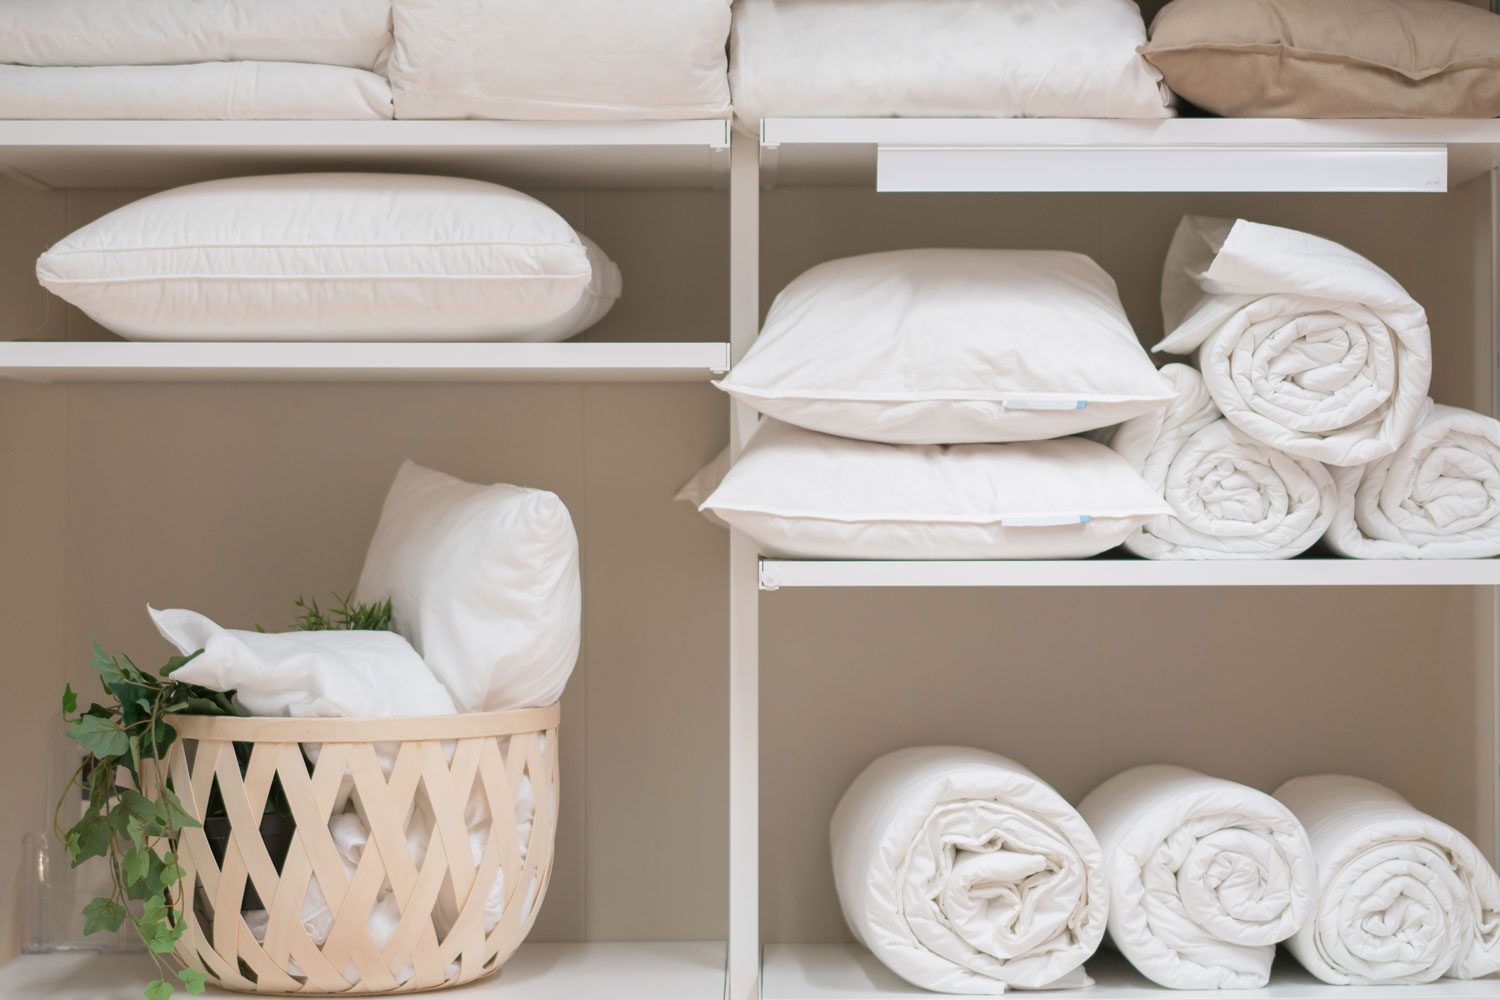 Various Household Items Such As Pillows And Quilts Standing In The White Cupboard of the laundry room